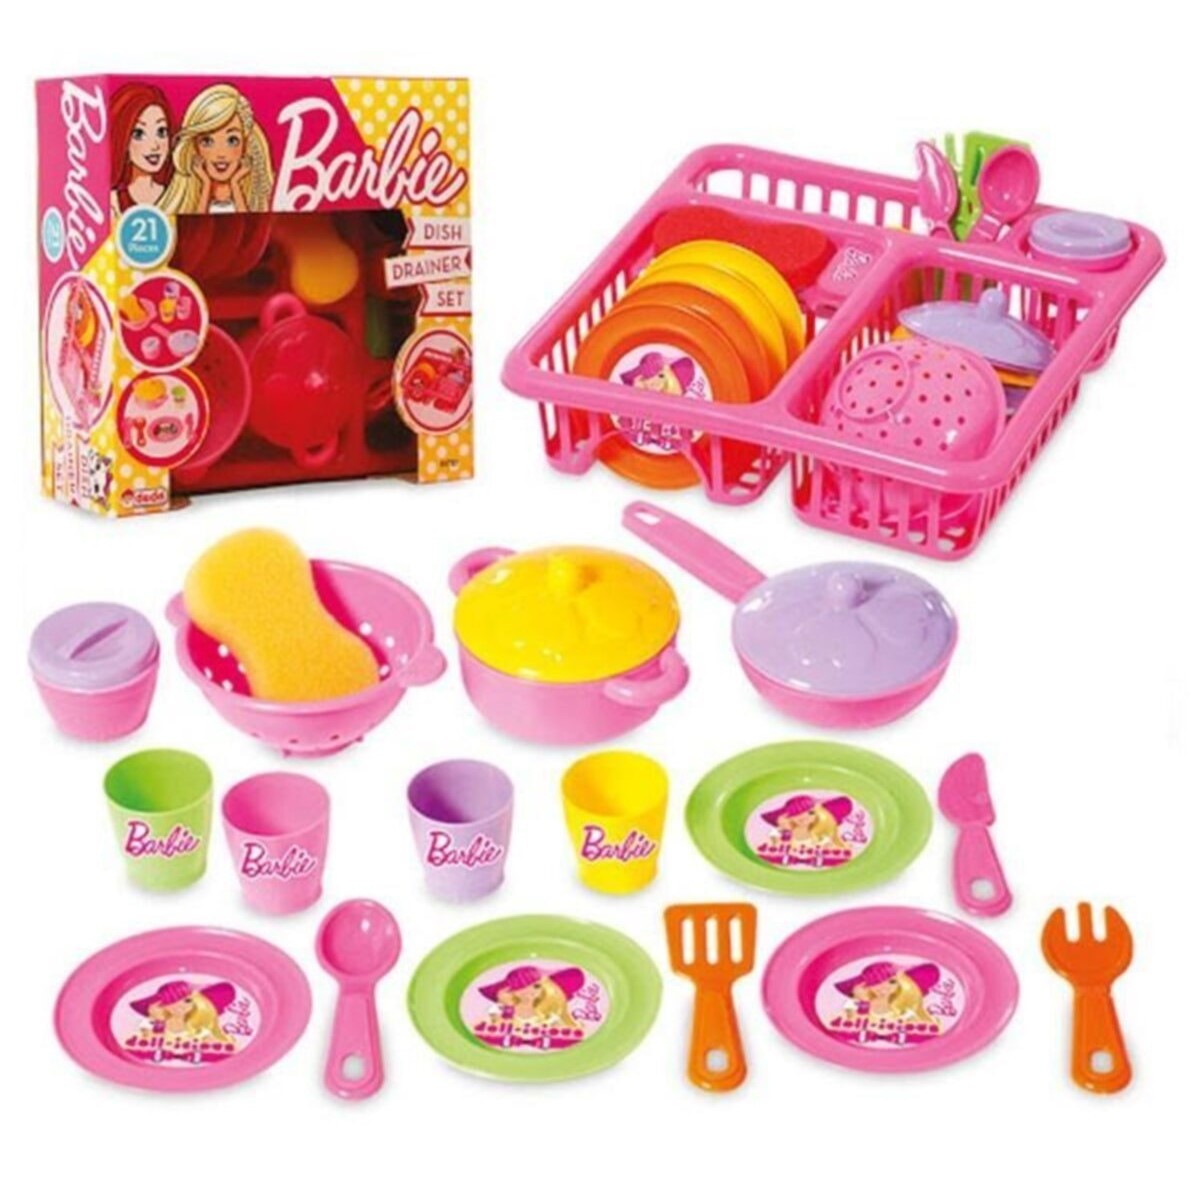 Barbie Cookware And Dish Rack Set-01753